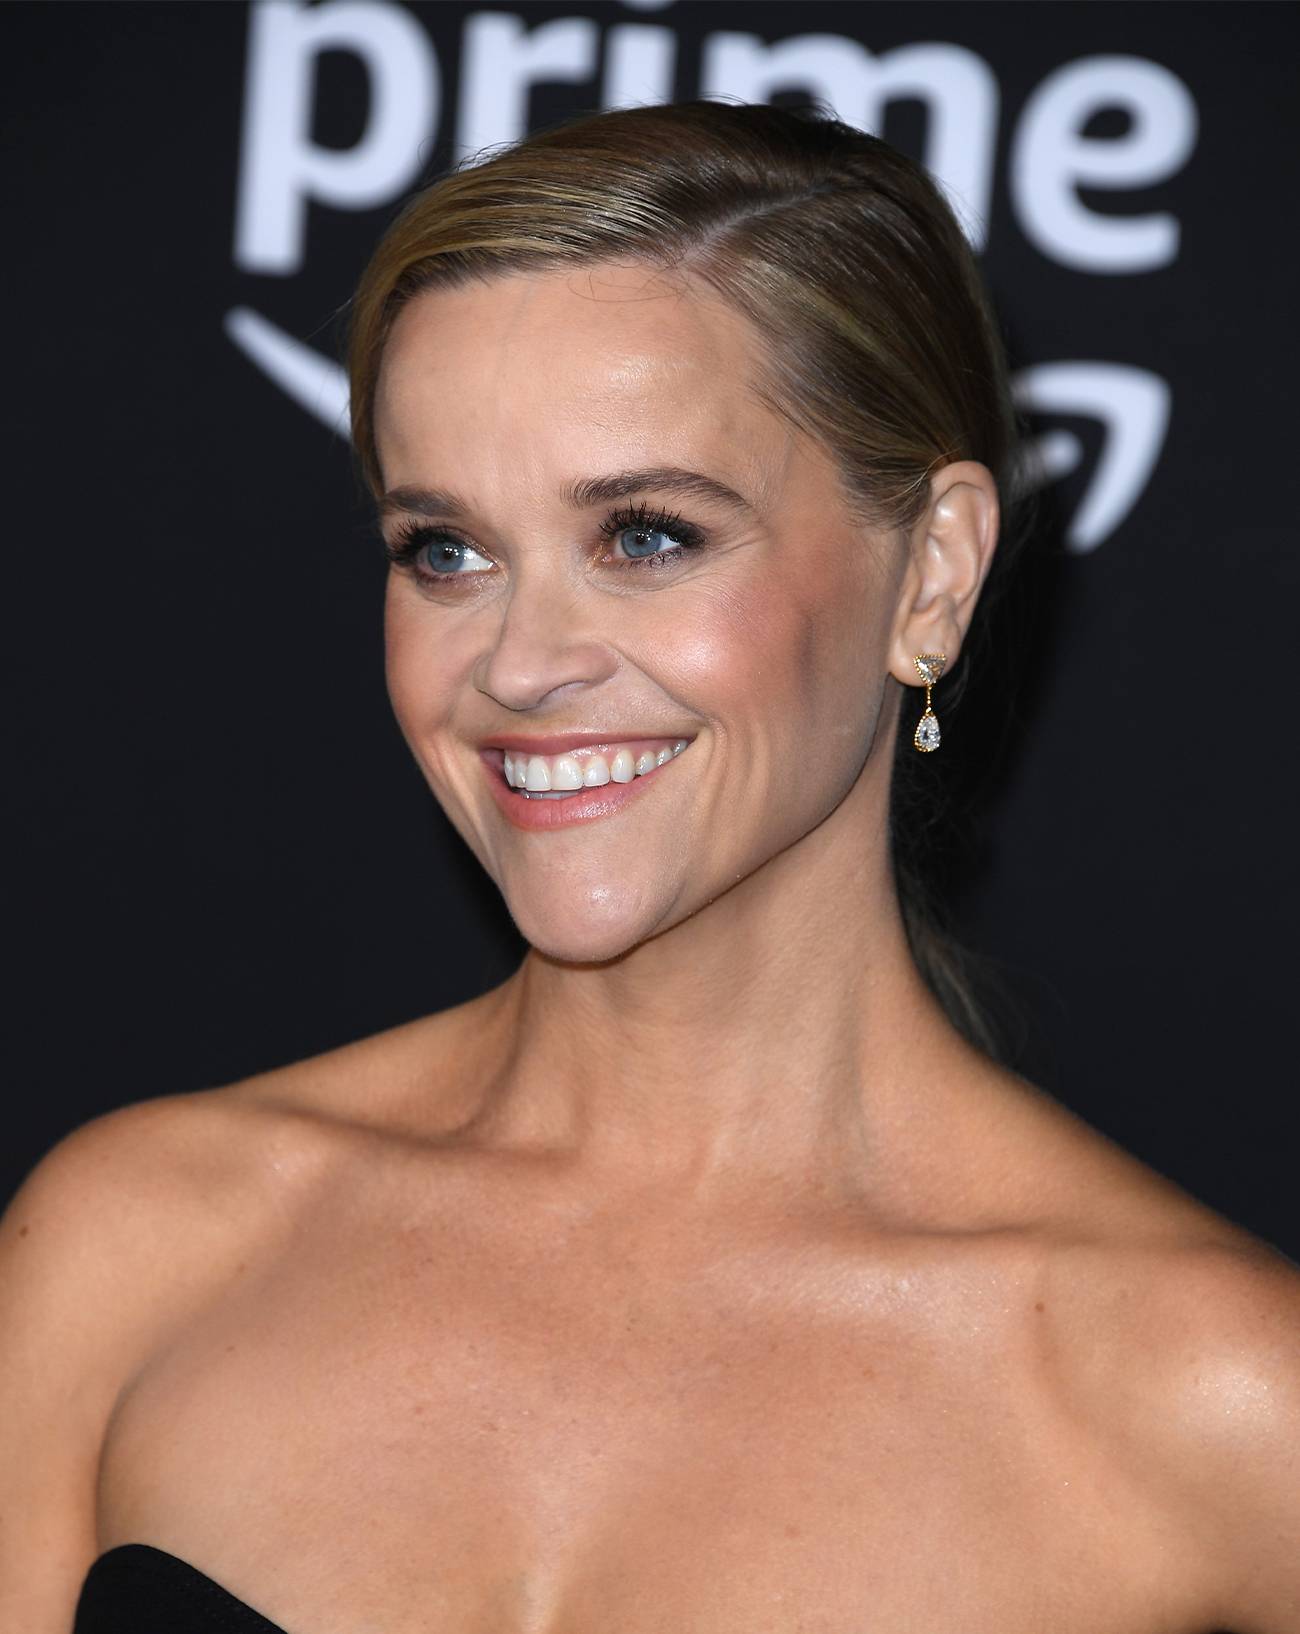 Reese Witherspoon, La Revanche d'une blonde, Série, Prime Video 